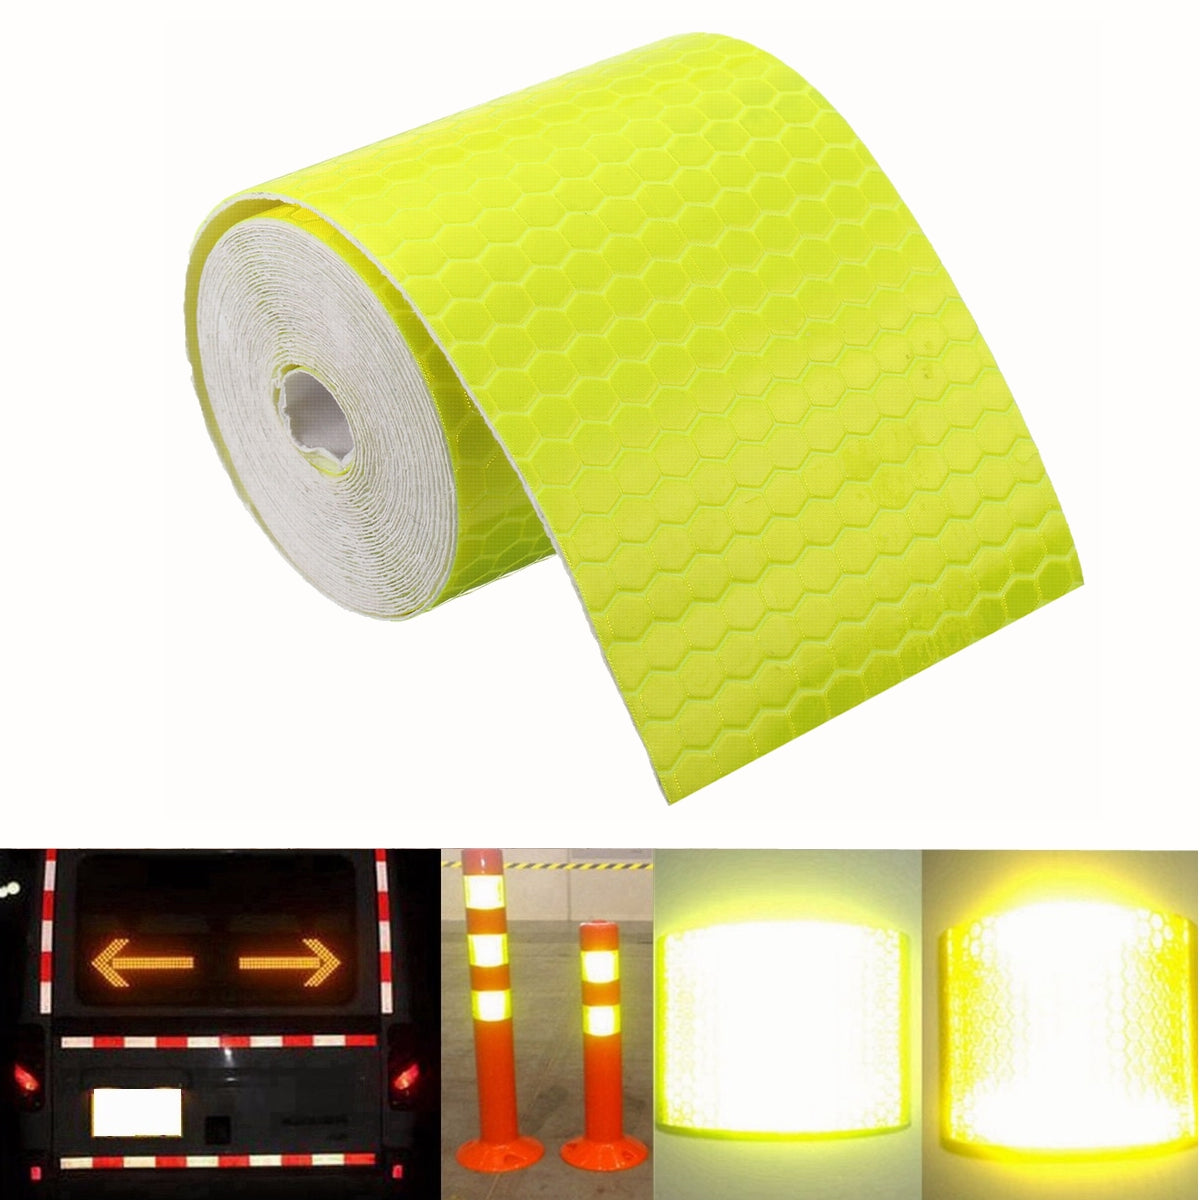 5cm X 300cm Reflective Safety Warning Conspicuity Tape Film Car Sticker 